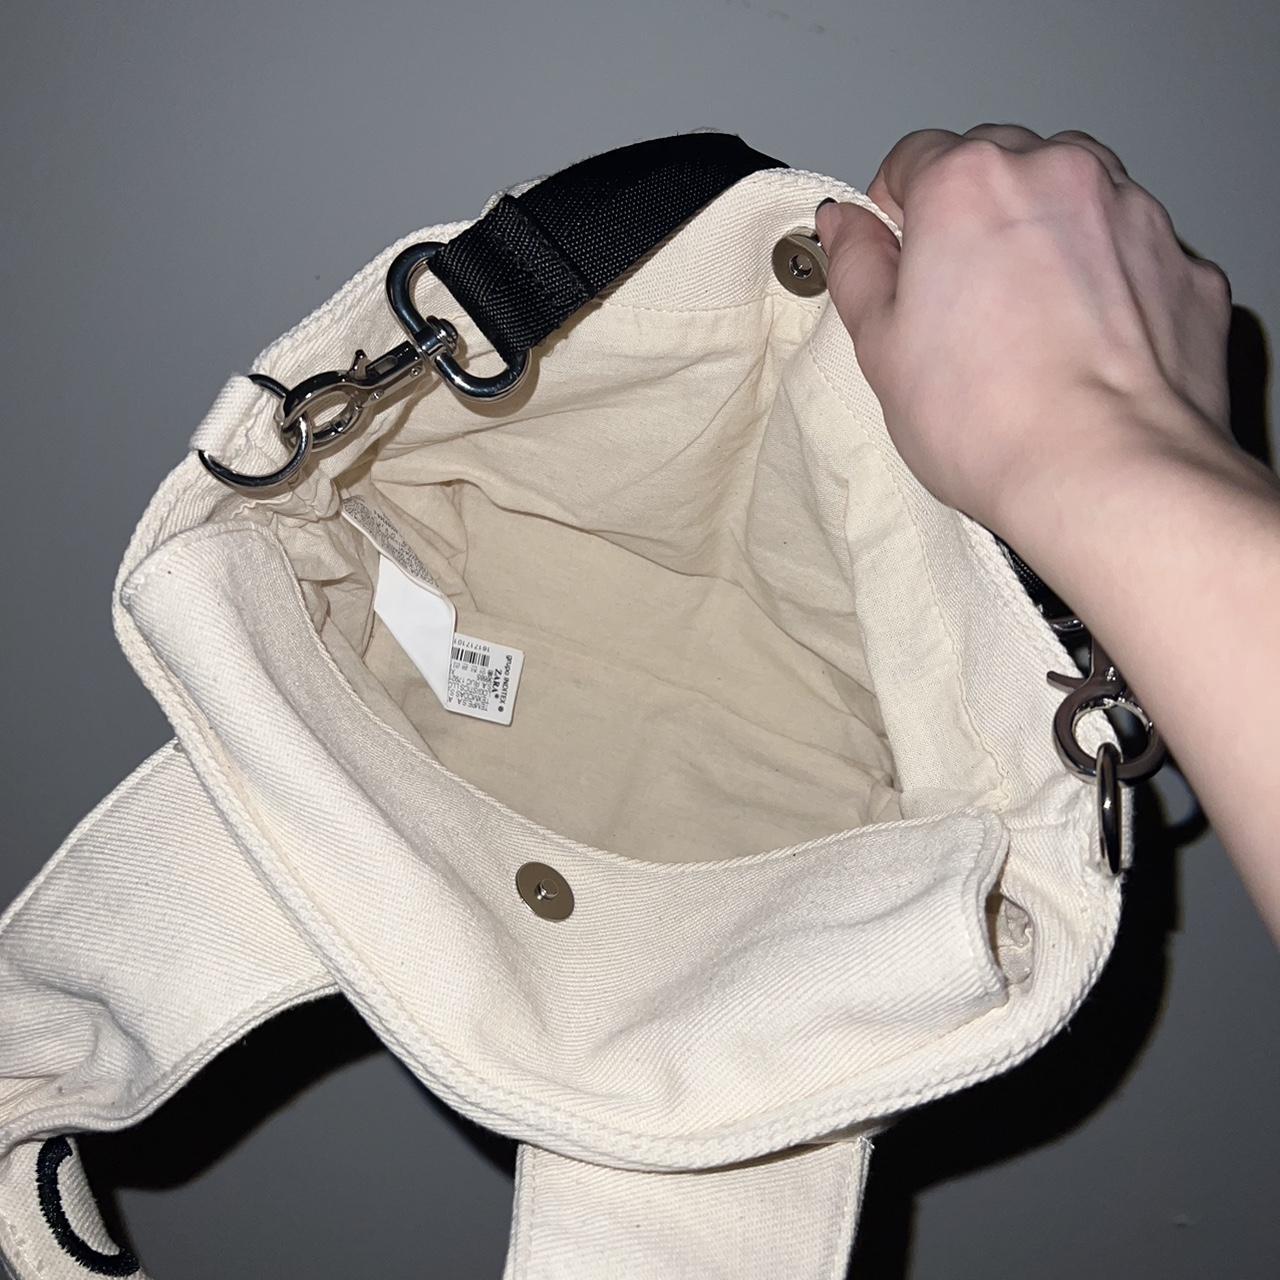 Multi sac backpack Brand new with tags Paid - Depop